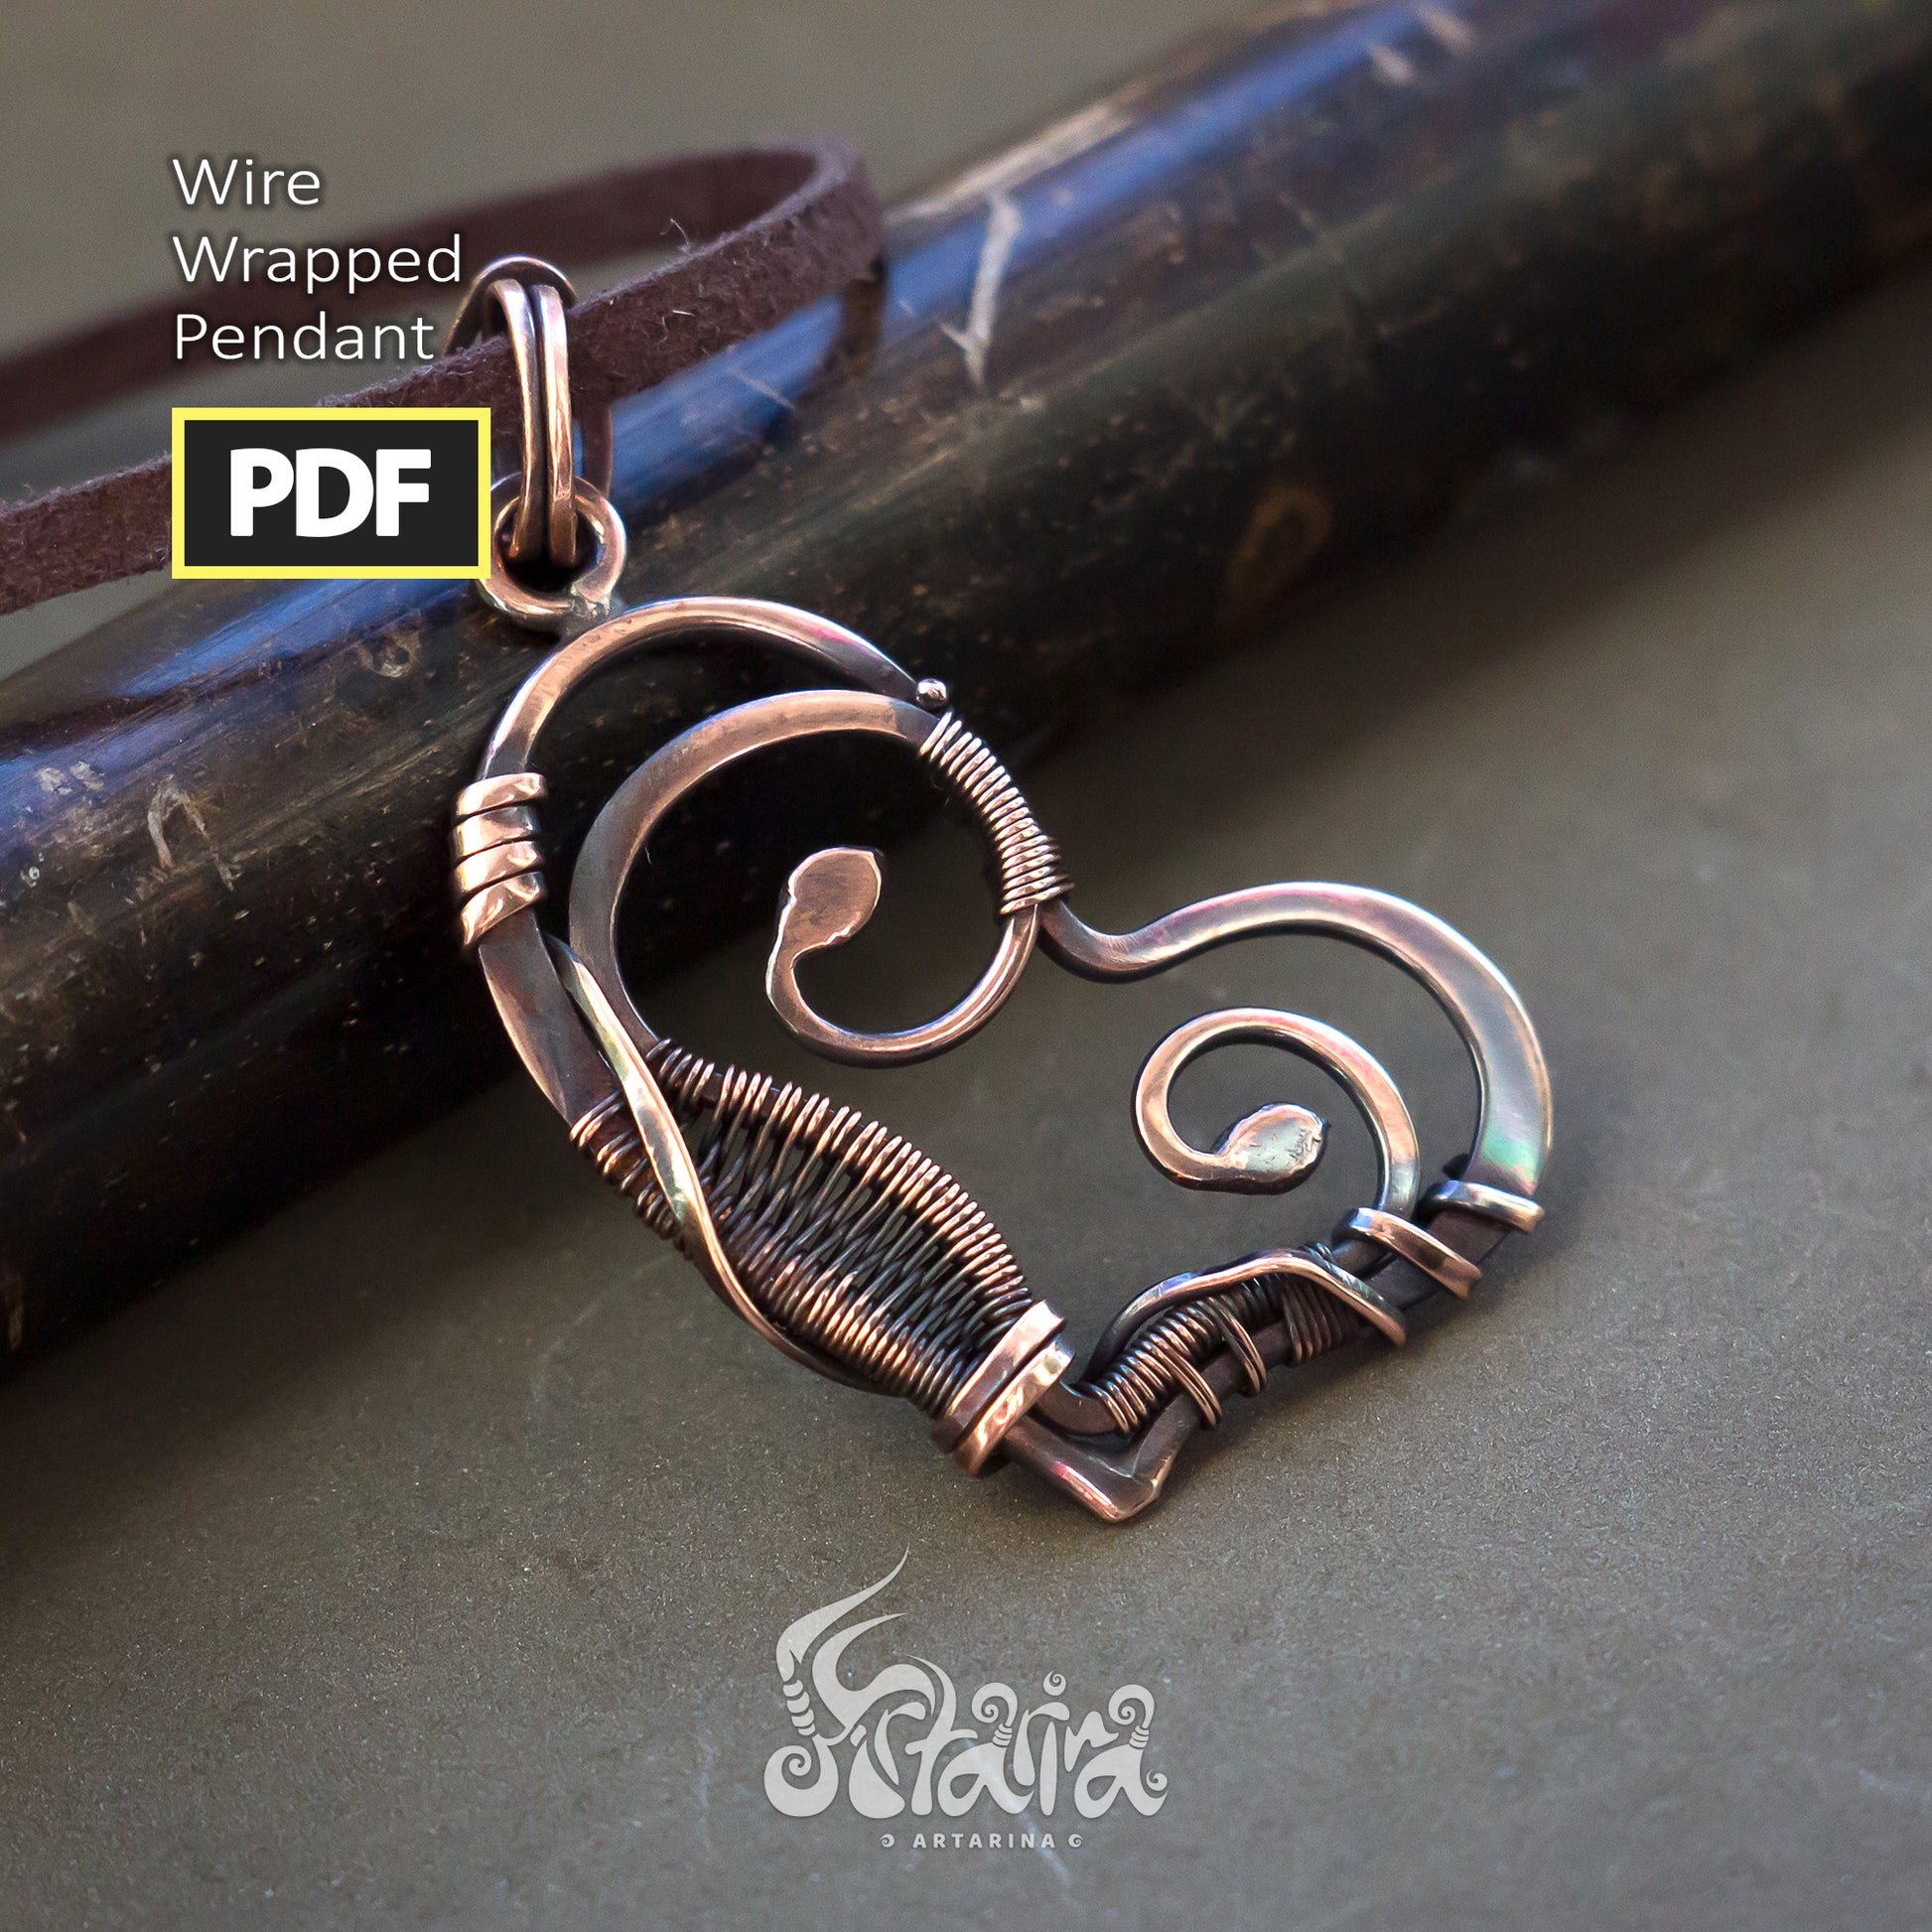 4 Simplest Wire Wrapping Tutorials for great beginner start! pic 2